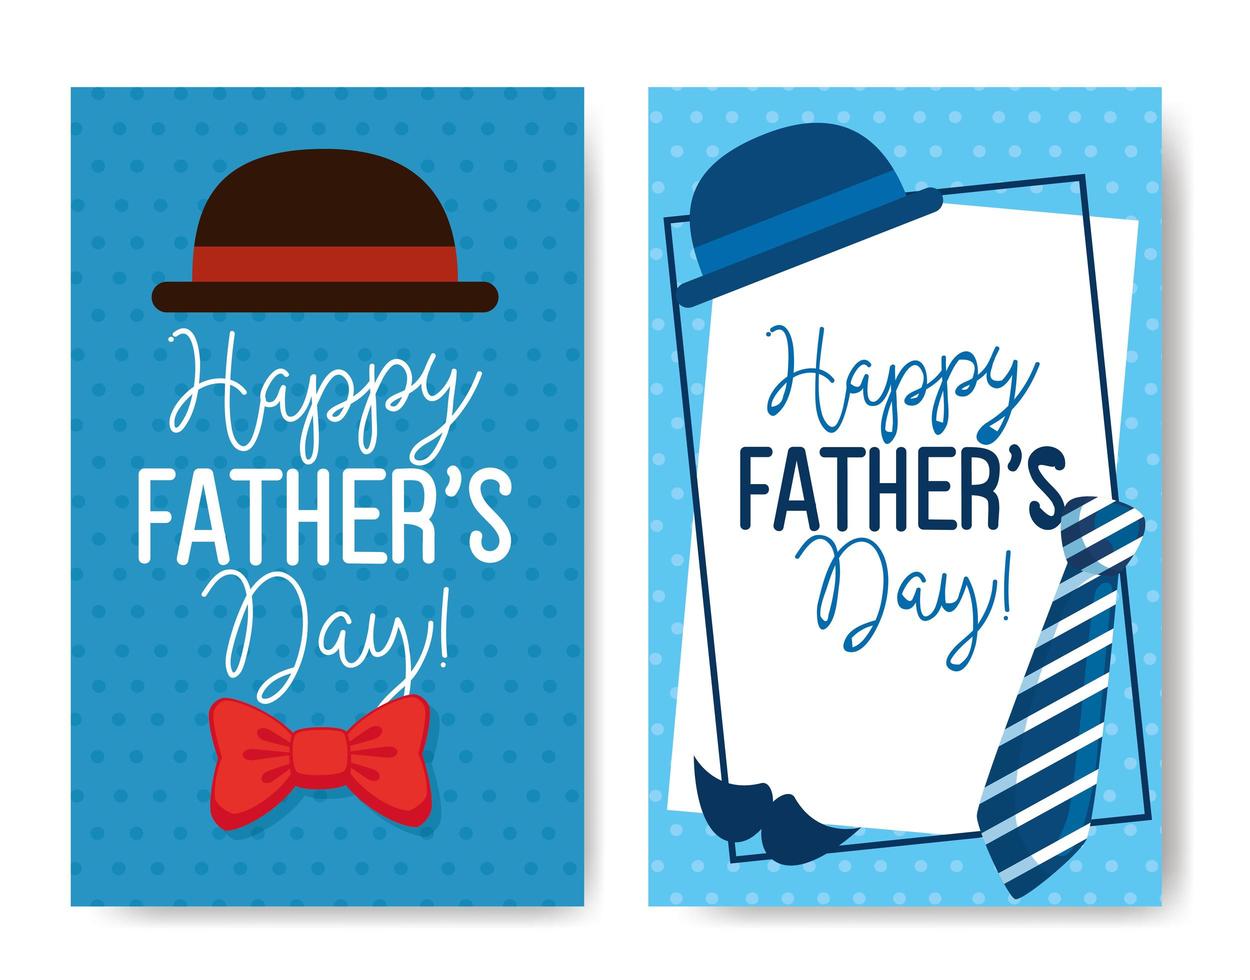 ser cards of happy fathers day with decoration vector